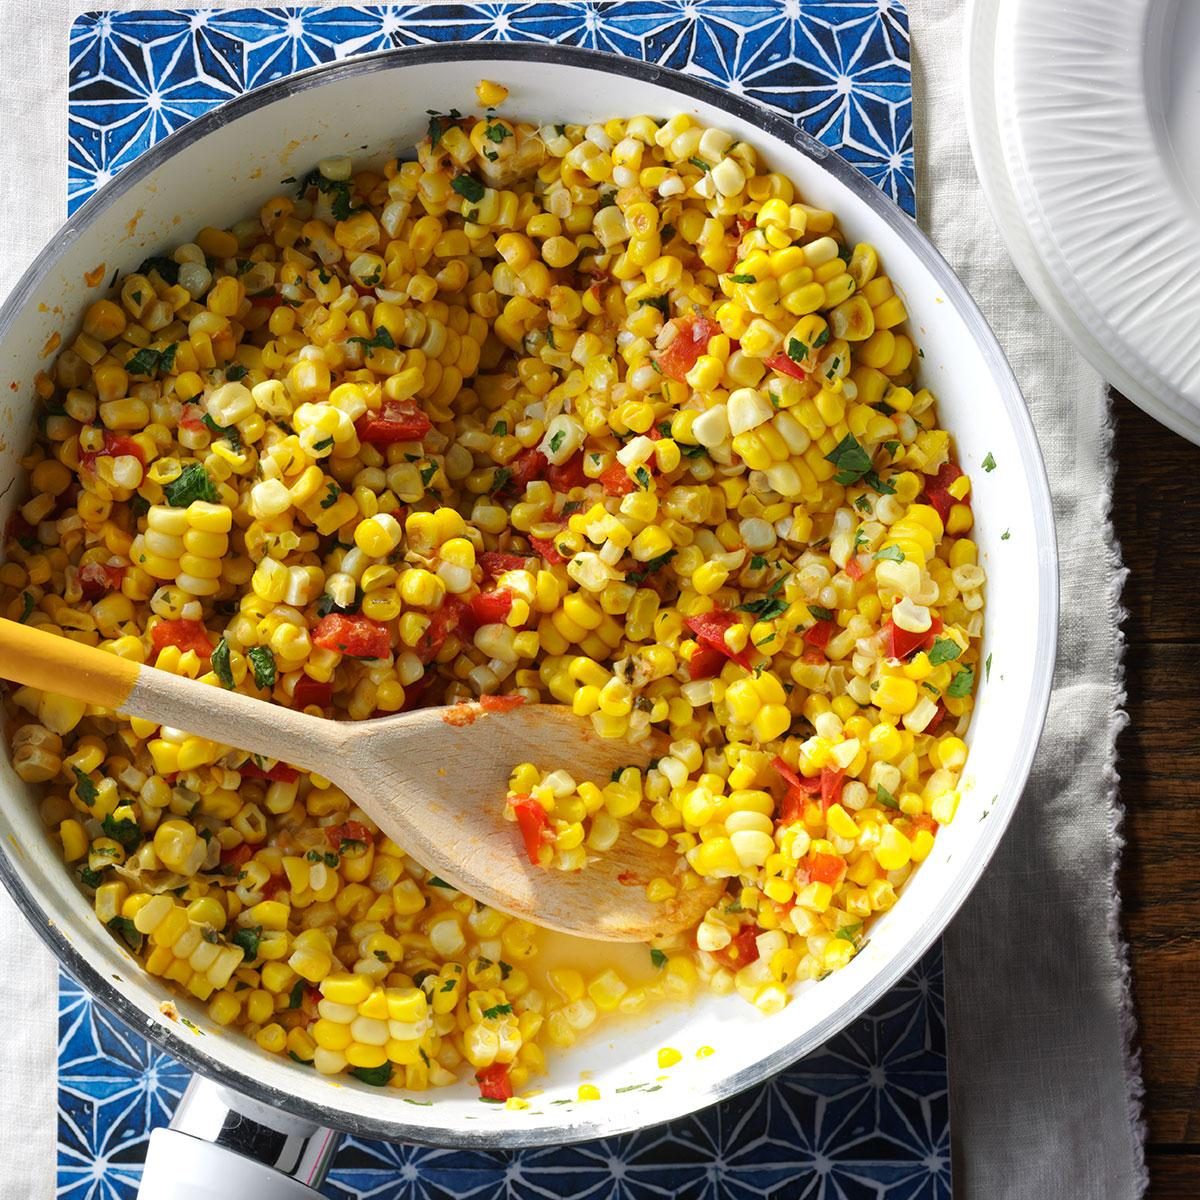 Inspired by: California Pizza Kitchen Mexican Street Corn